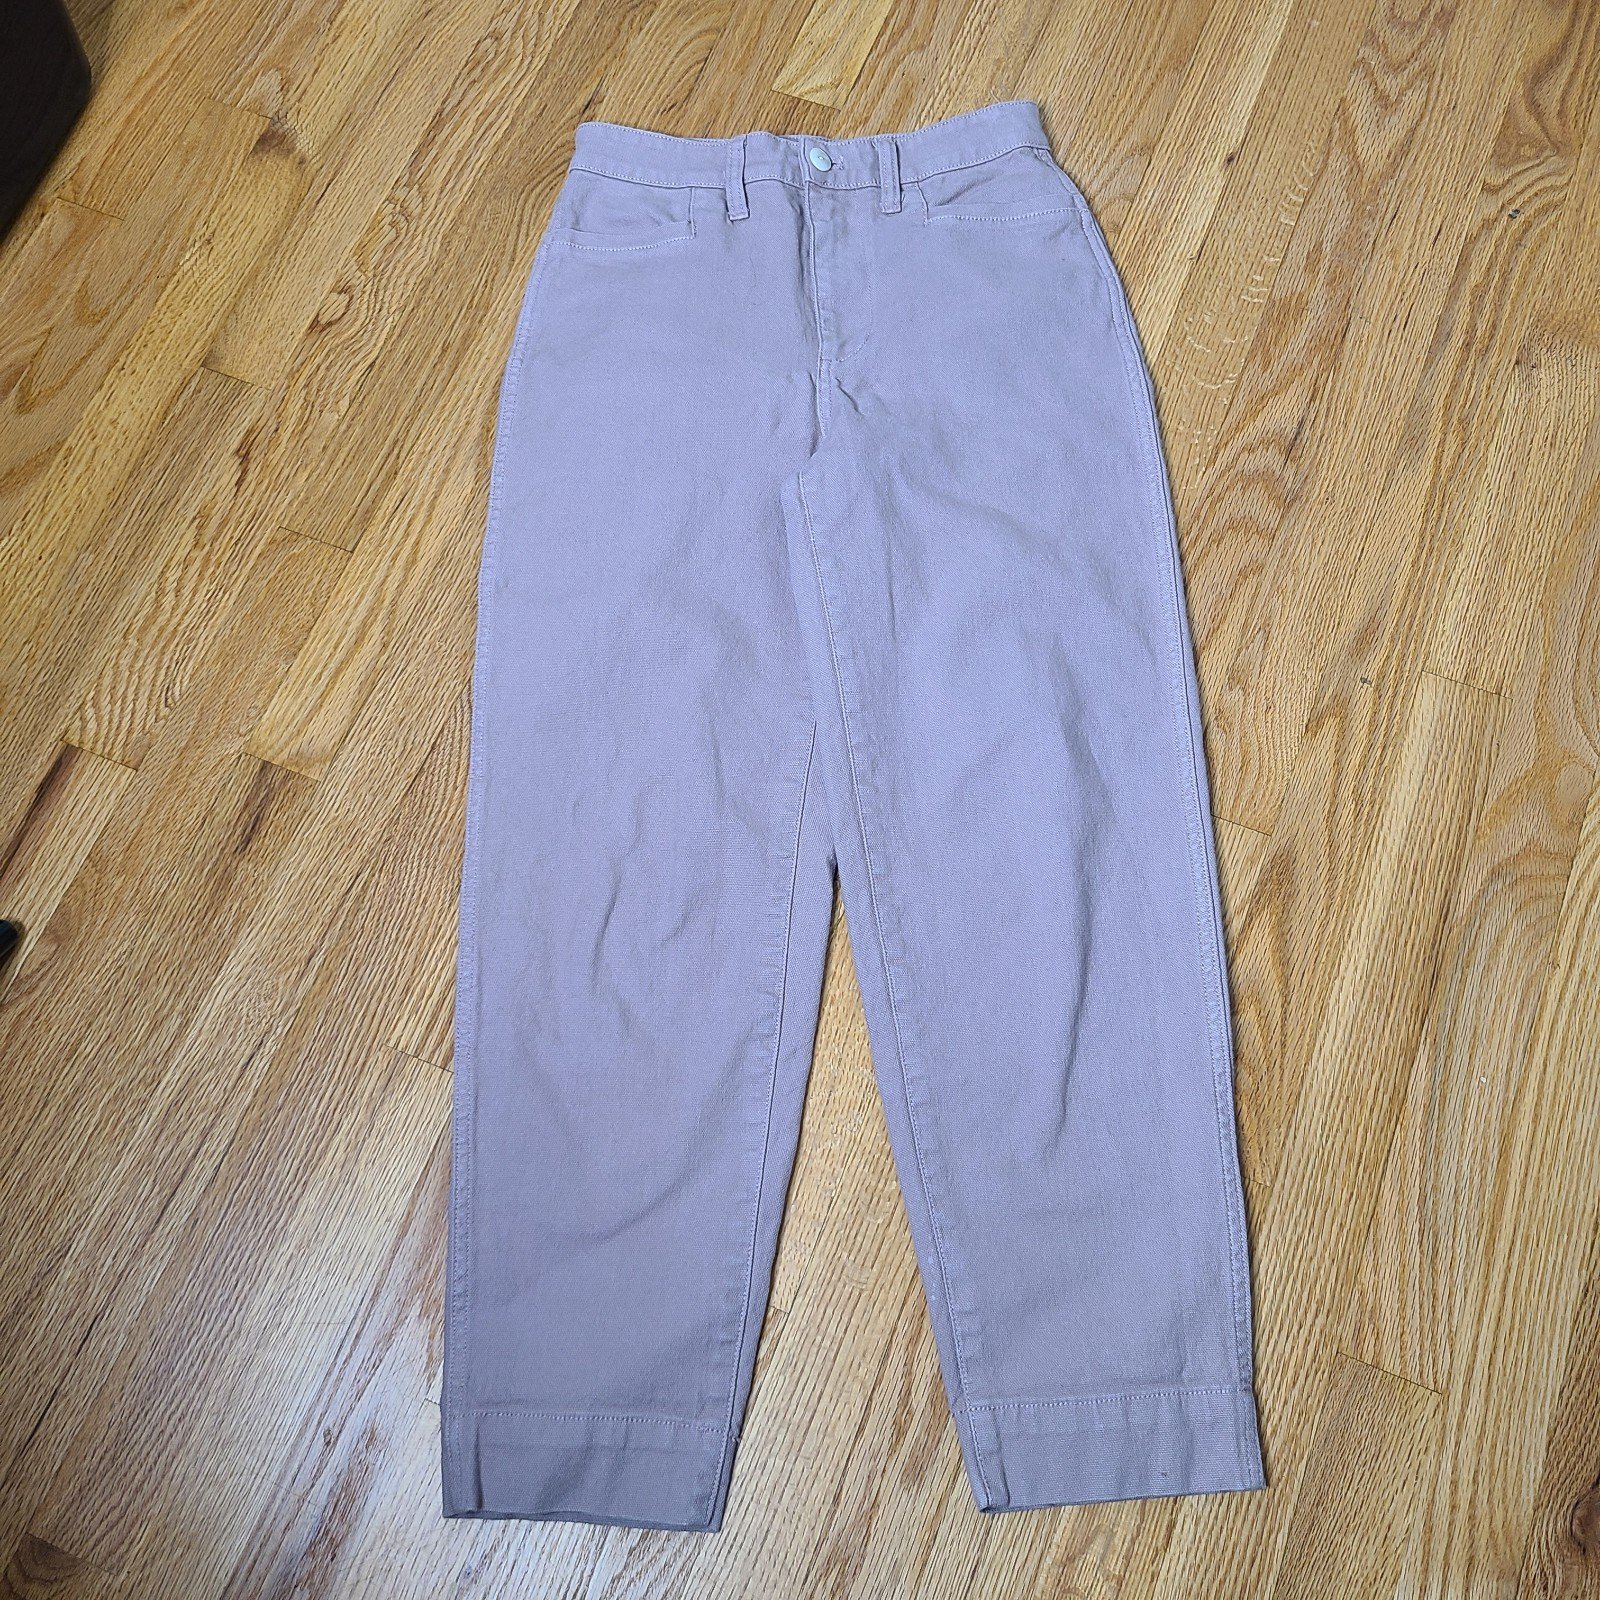 large discount Madewell Size 26 Slim Emmett Tapered Pants j4zCJhHjb Outlet Store